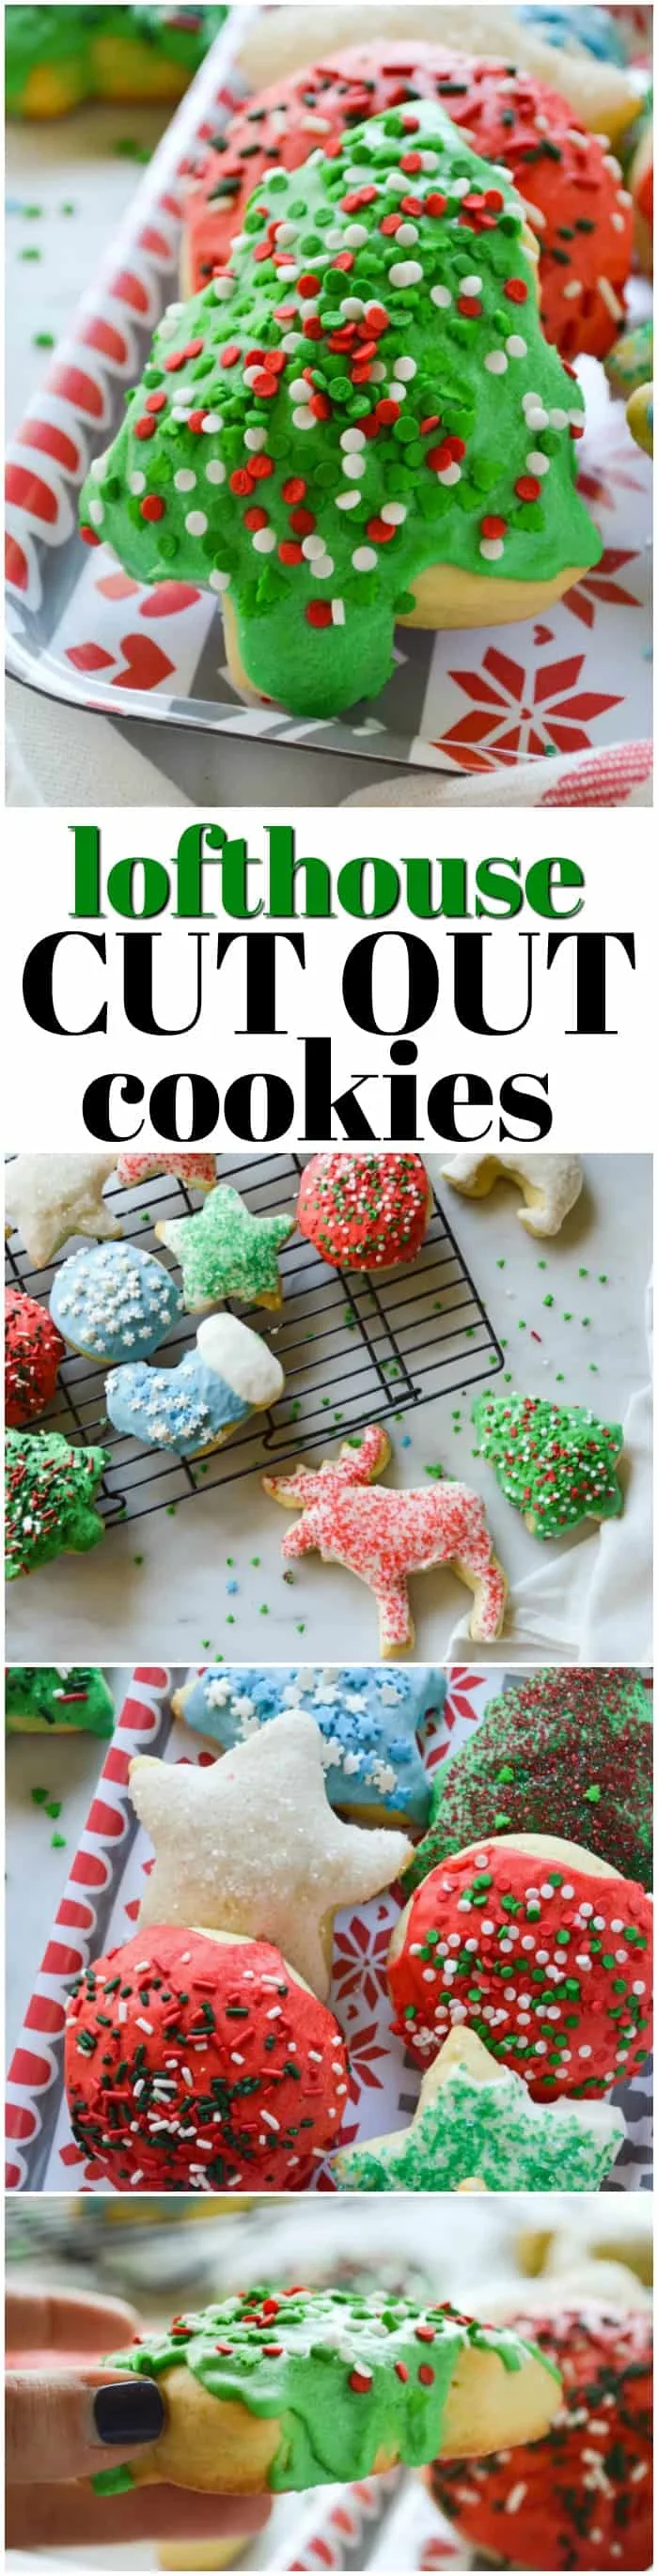 Lofthouse Cut Out Cookies